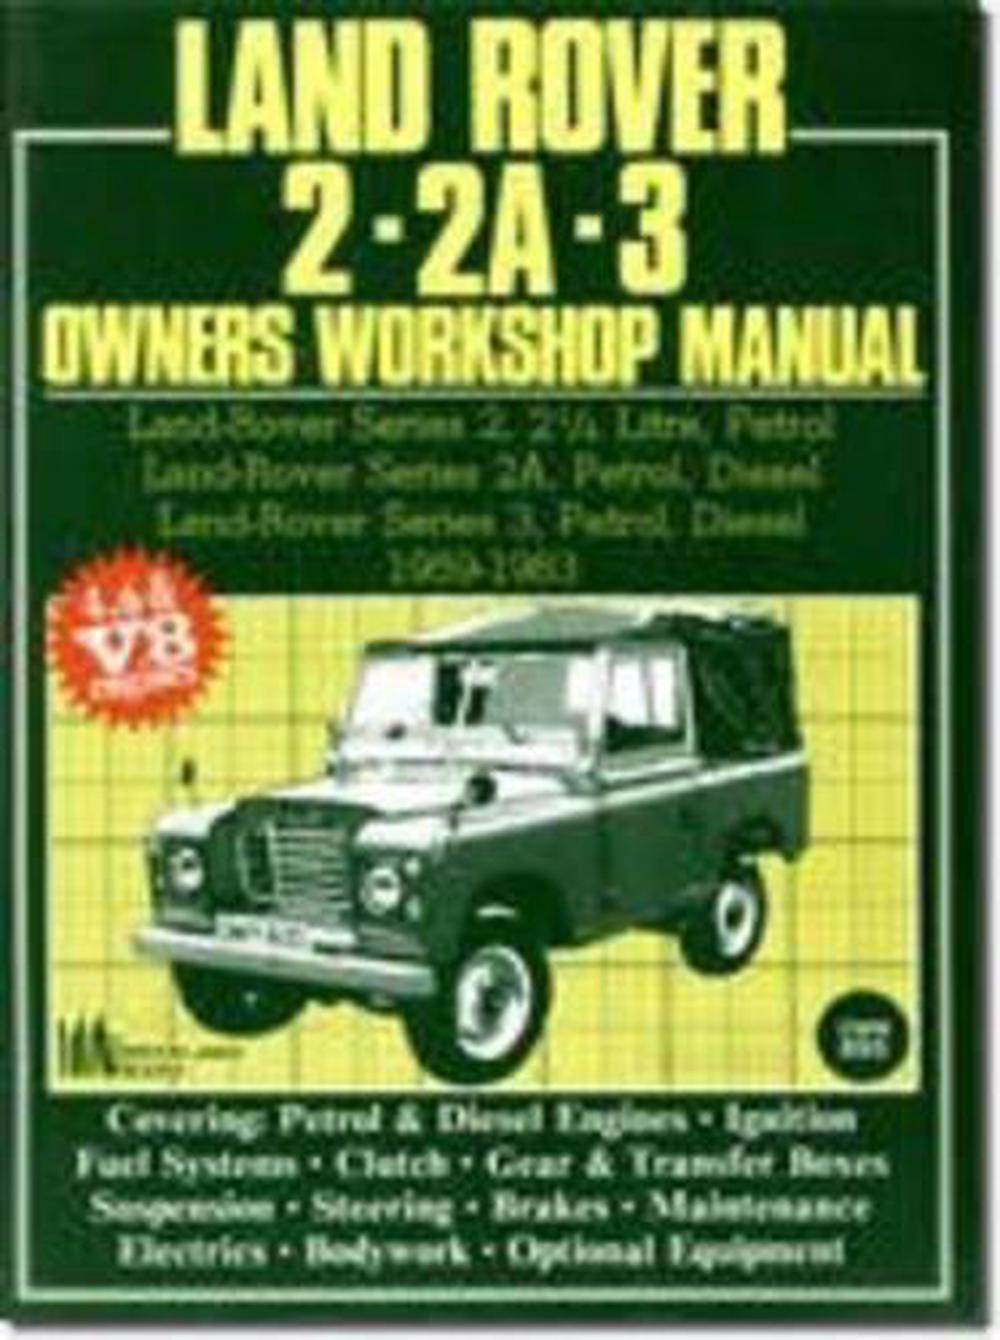 Land Rover 2-2A-3 Owners Workshop Manual by Autobooks Team of Writers